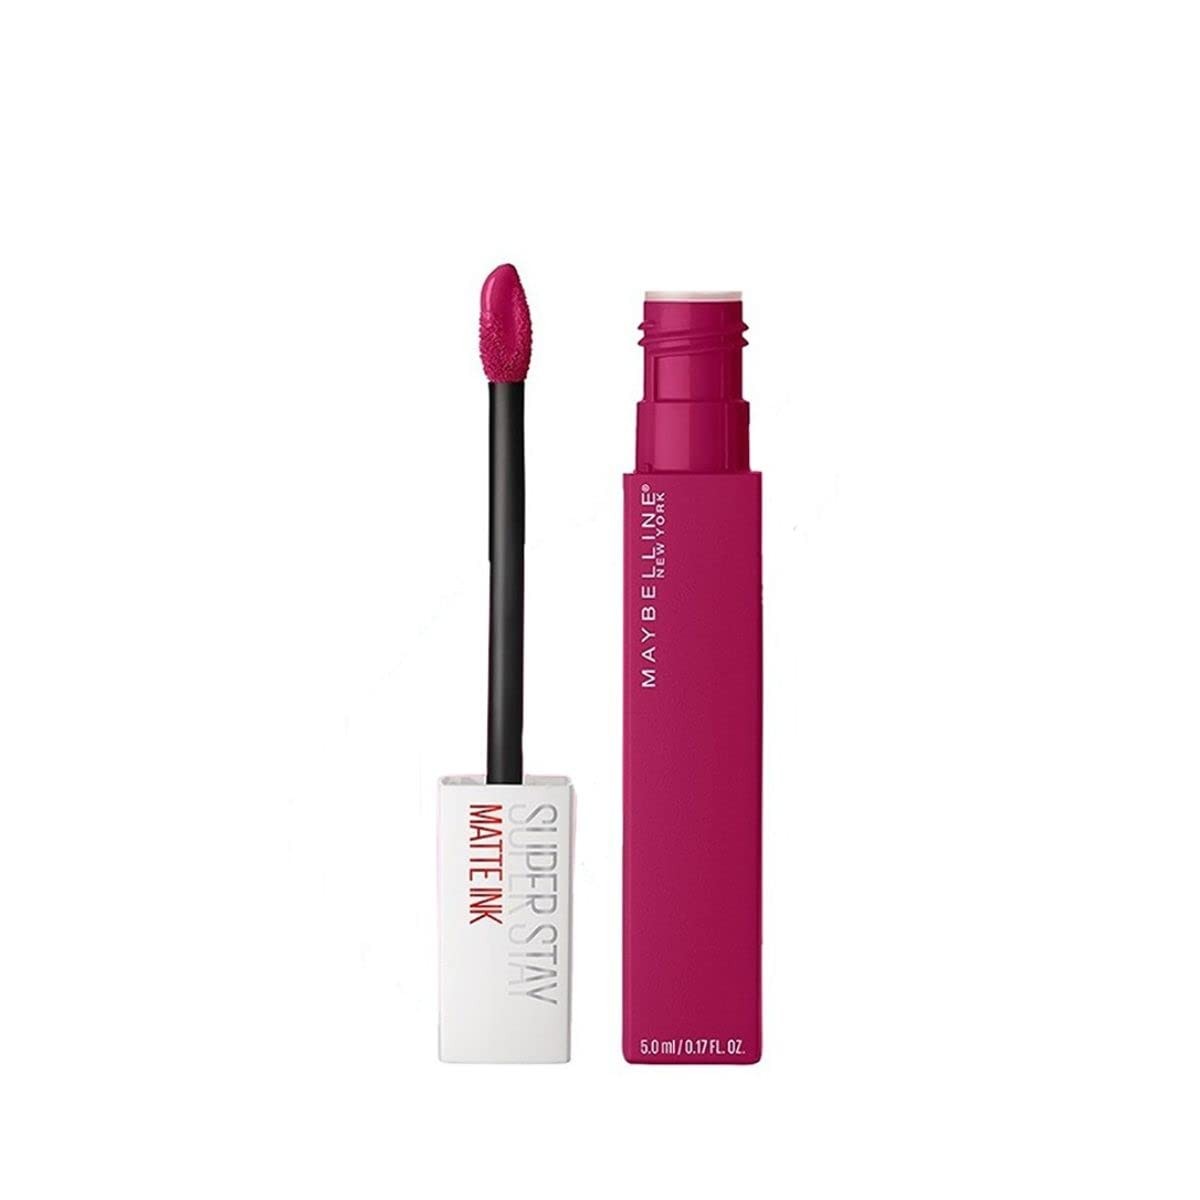 Maybelline Nepal: Maybelline Official Store at 